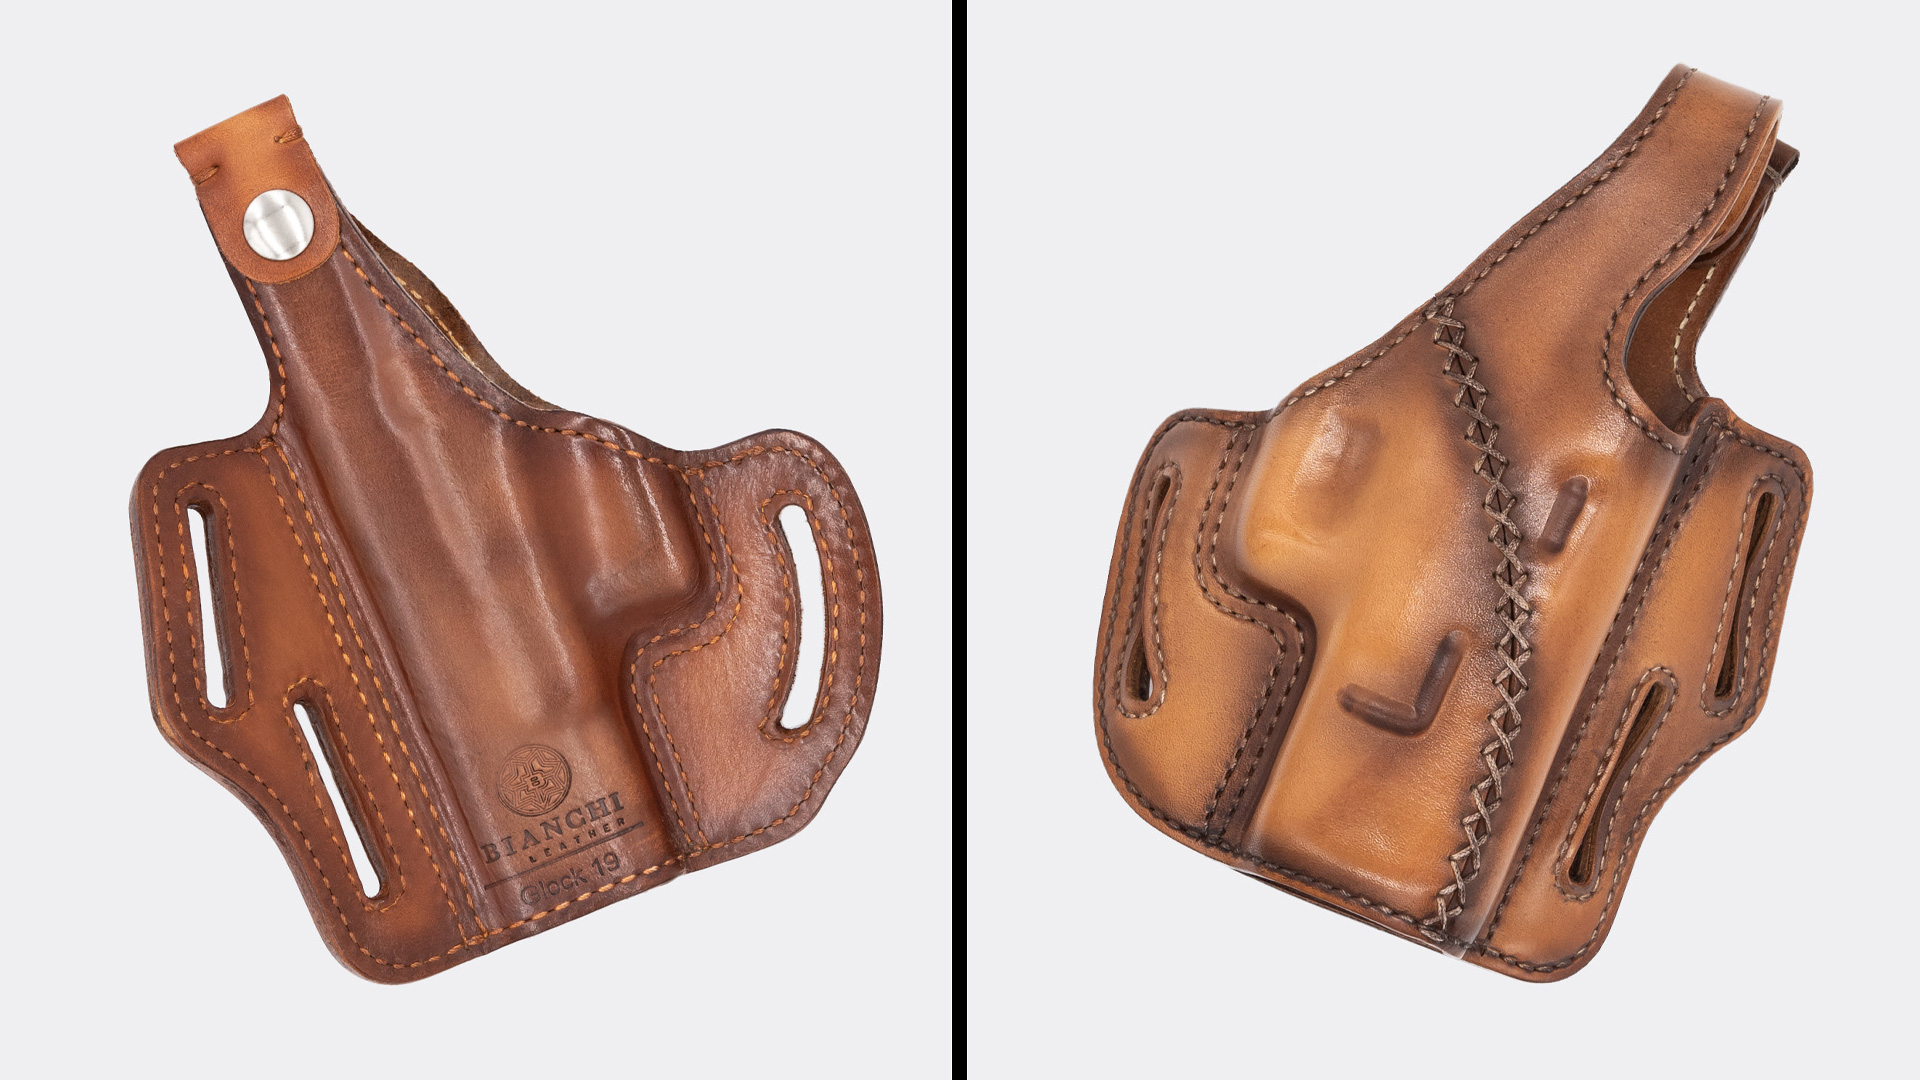 Lajatico and Vicopisano holsters